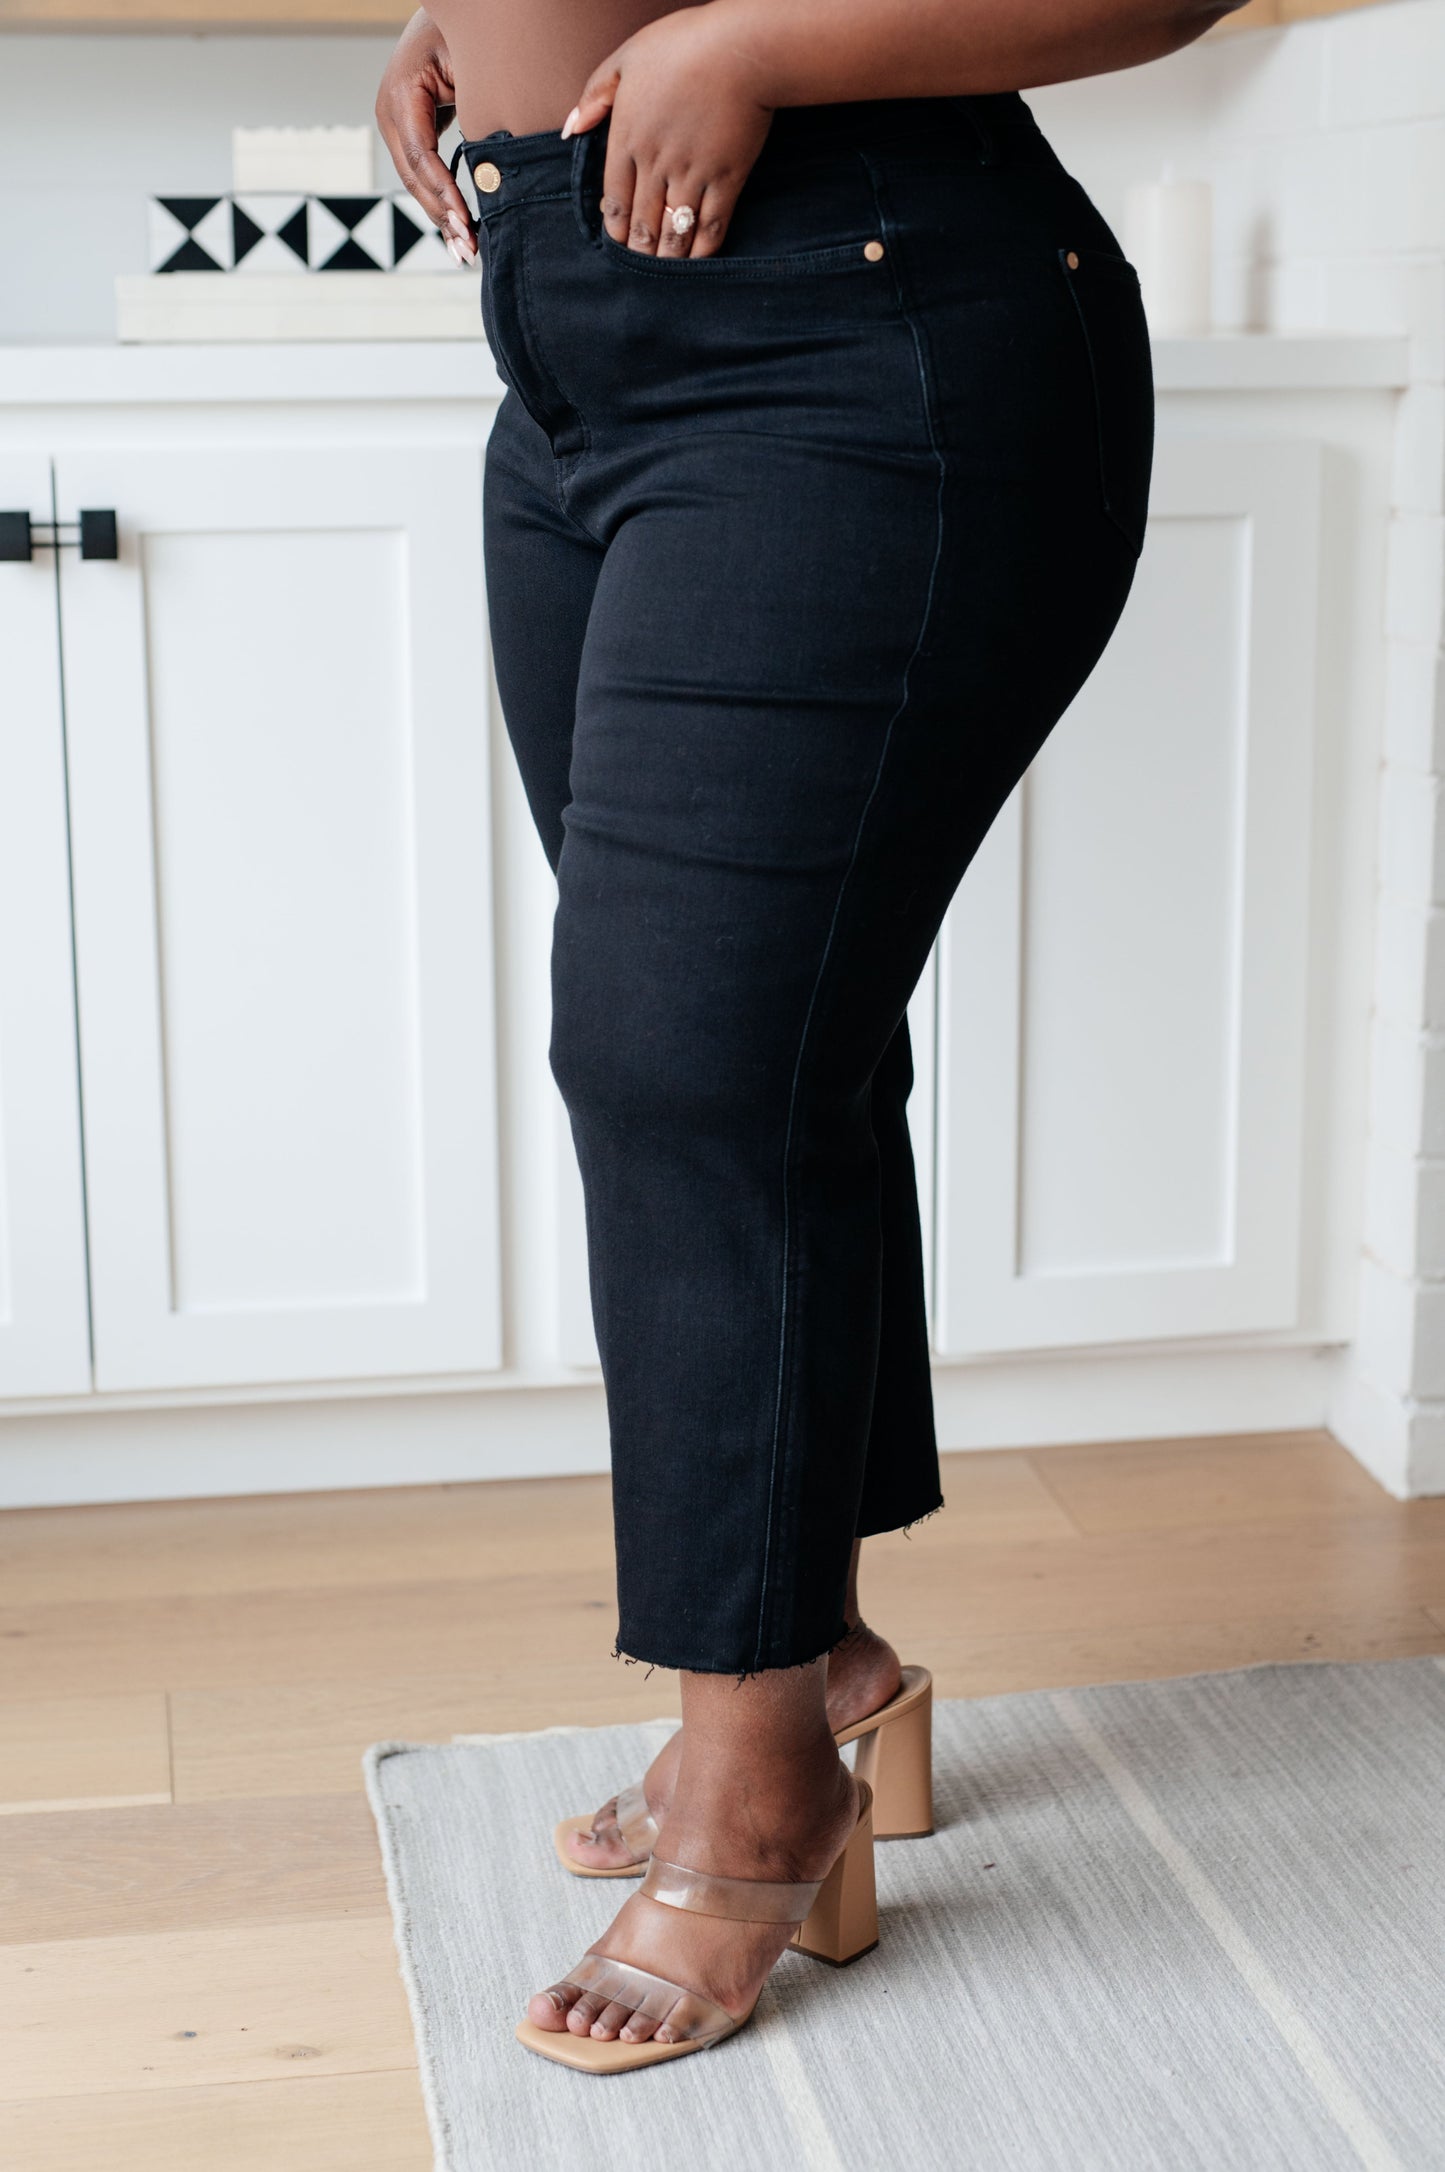 Enjoy a sleek, slimming silhouette with the Lizzy High Rise Control Top Wide Leg Crop Jeans from Judy Blue. This stylish pair features a modern high rise with tummy control technology for a comfortable, flattering fit. The wide leg cut and raw hem add a cool, modern style, while the rich black hue looks great with any top. 0 -24 W